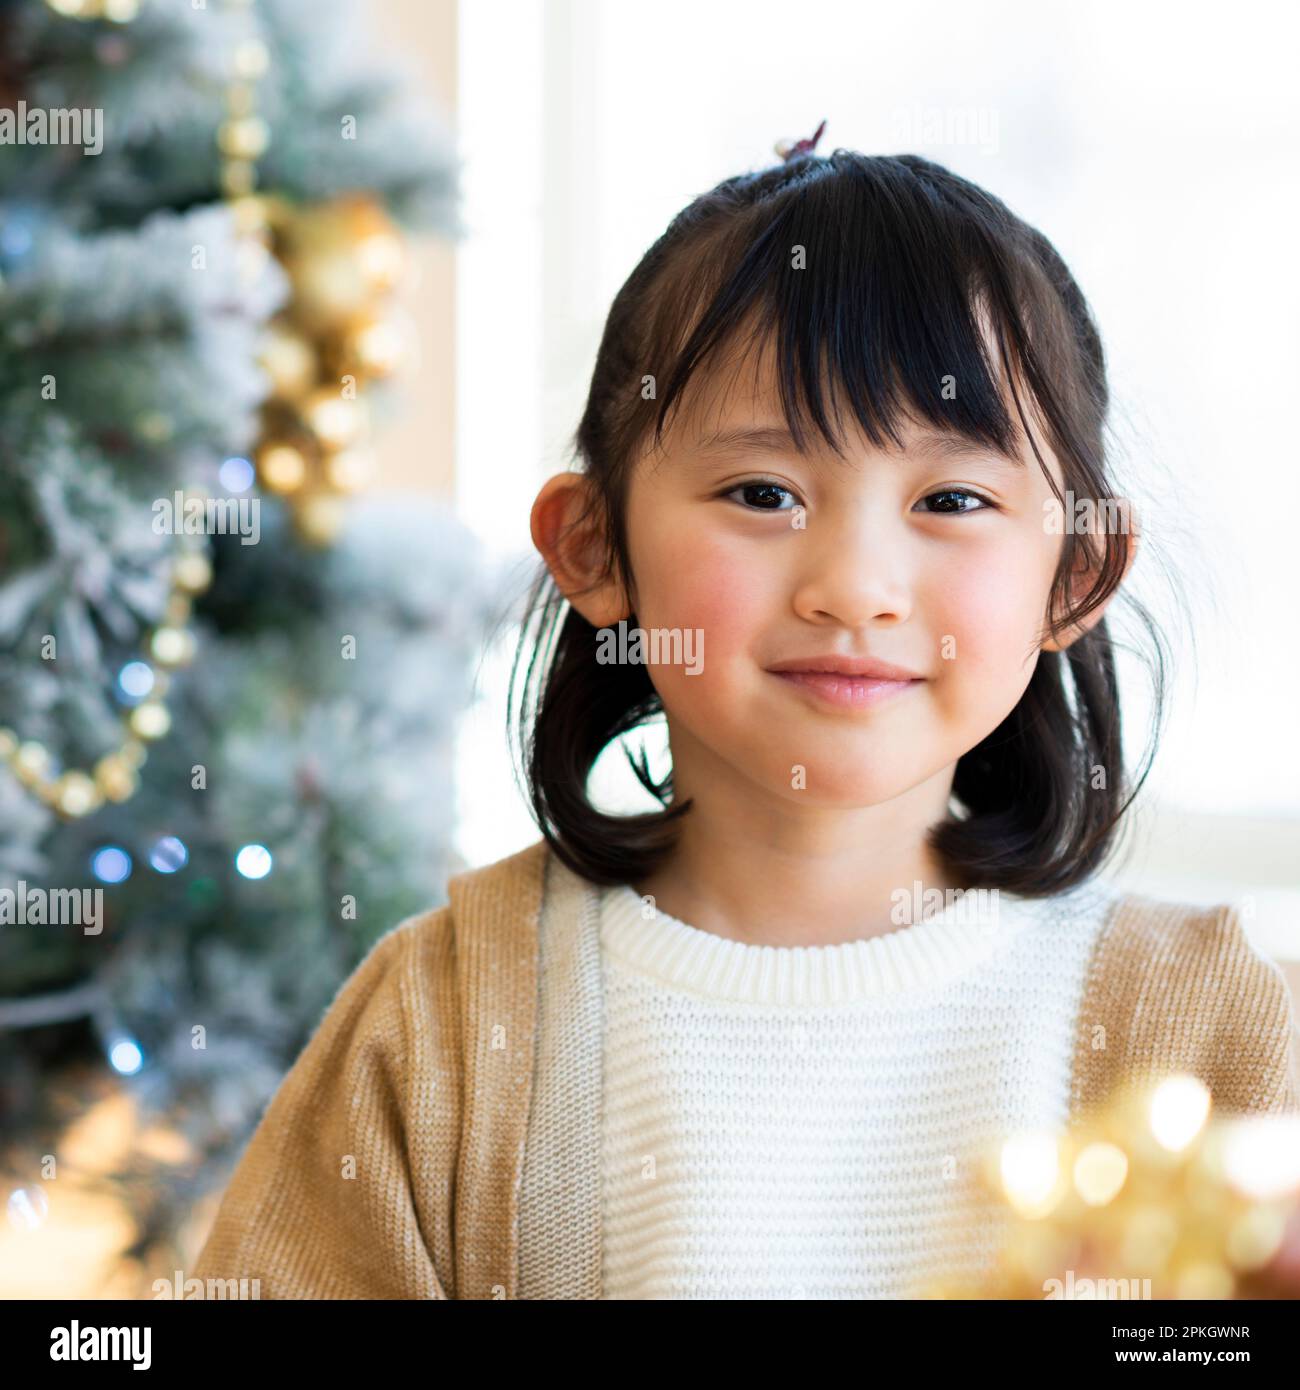 Girl smiling in front of Christmas tree Stock Photo